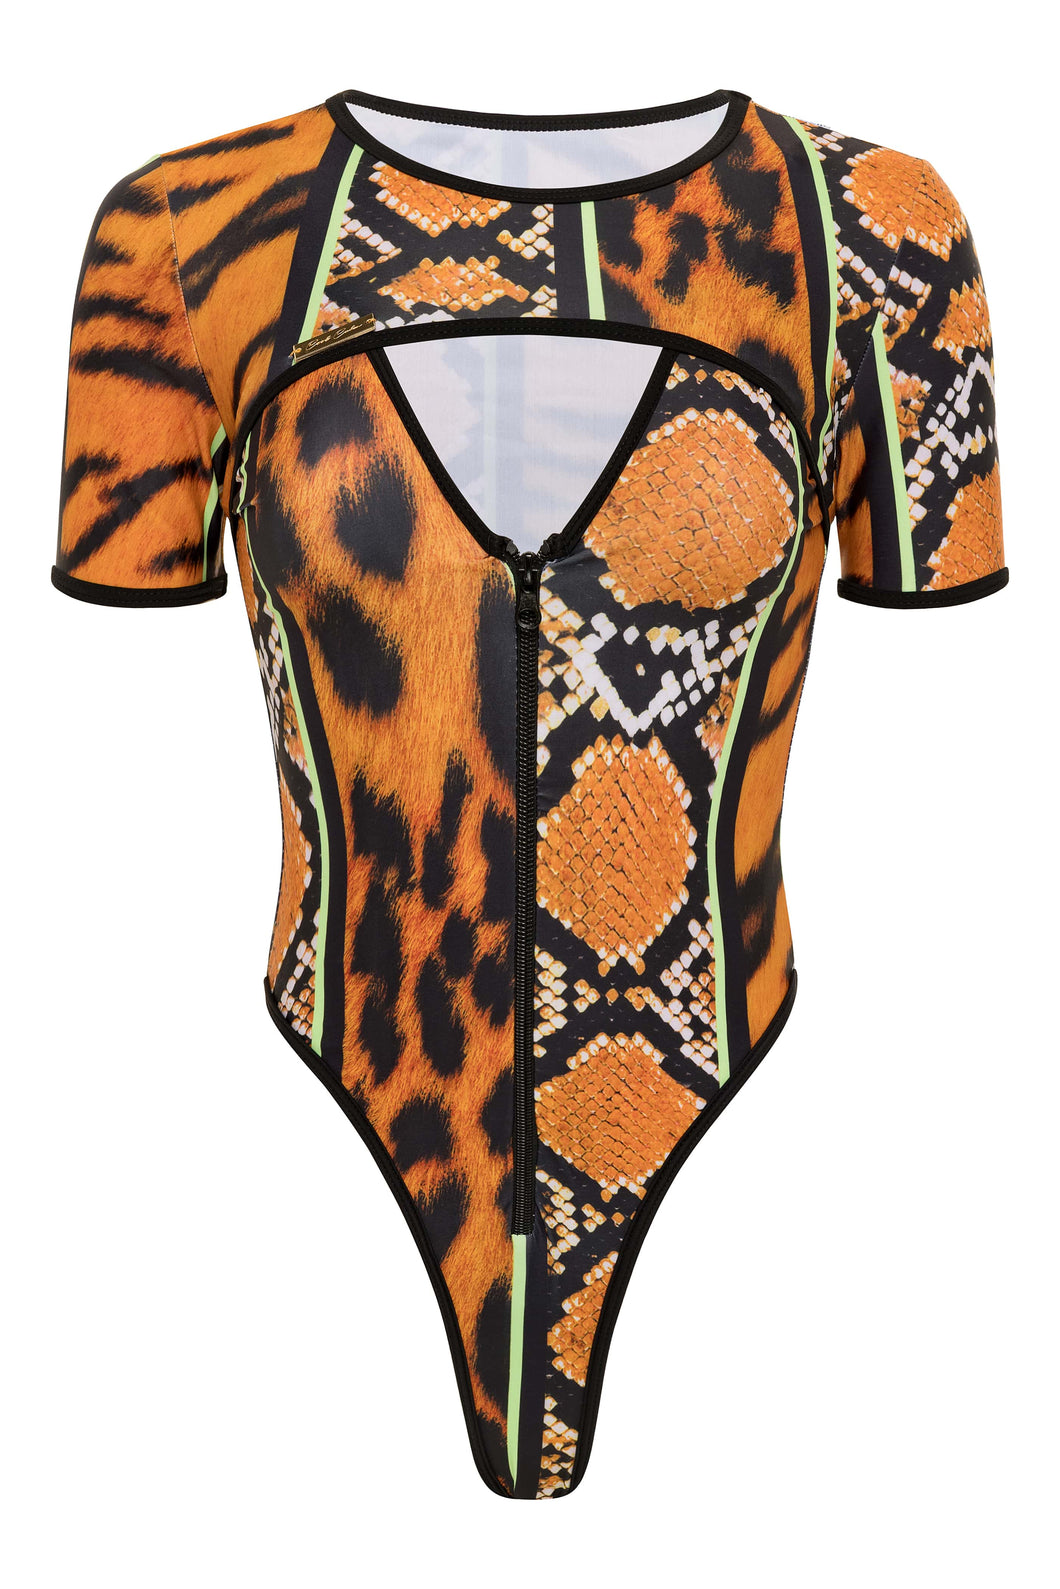 Gorgeous Wild African print two pieces swimsuit